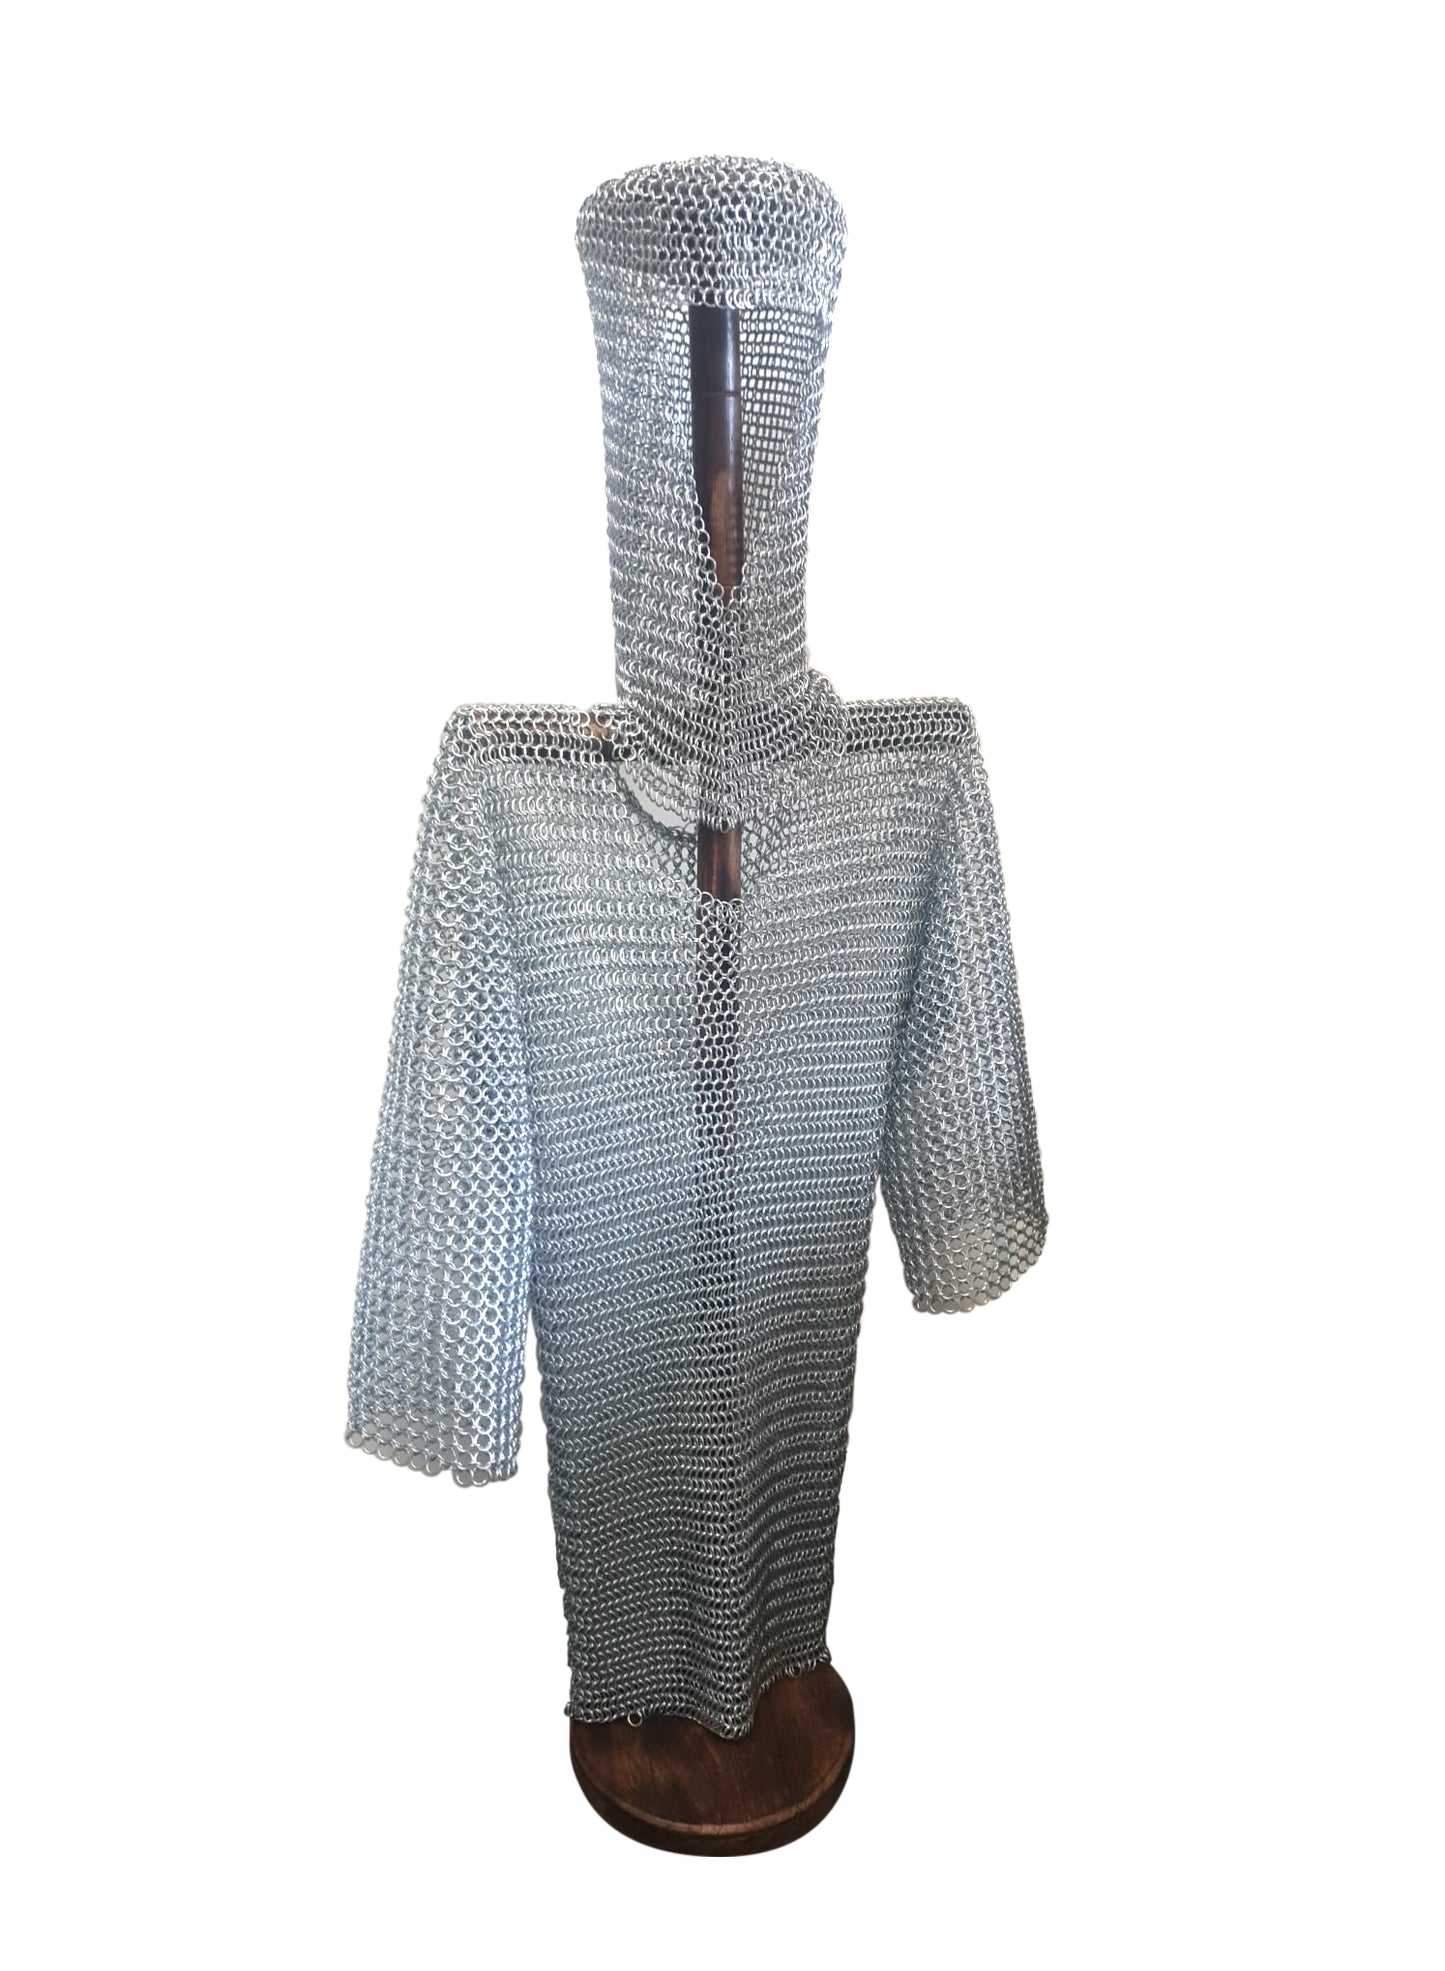 Chainmail Armour Set- (MA106)